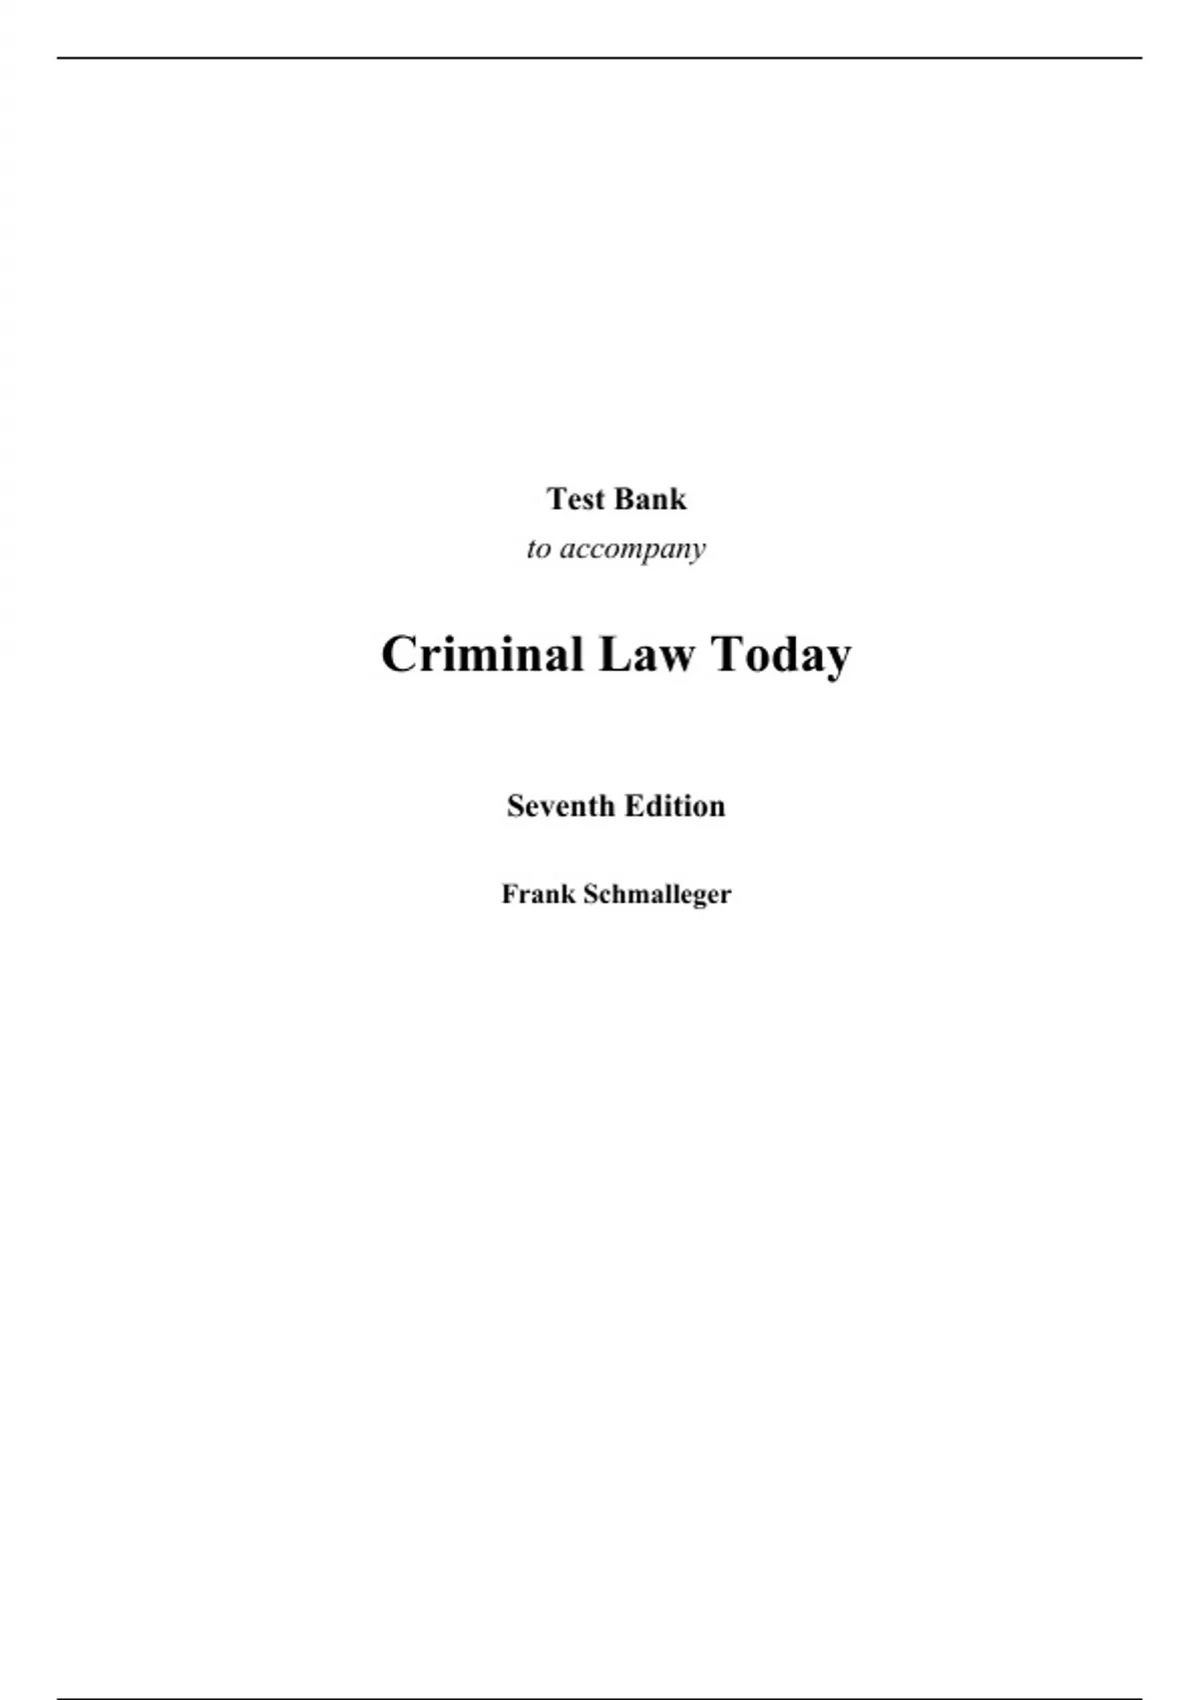 Test Bank for Criminal Law Today 7th Edition By Frank Schmalleger